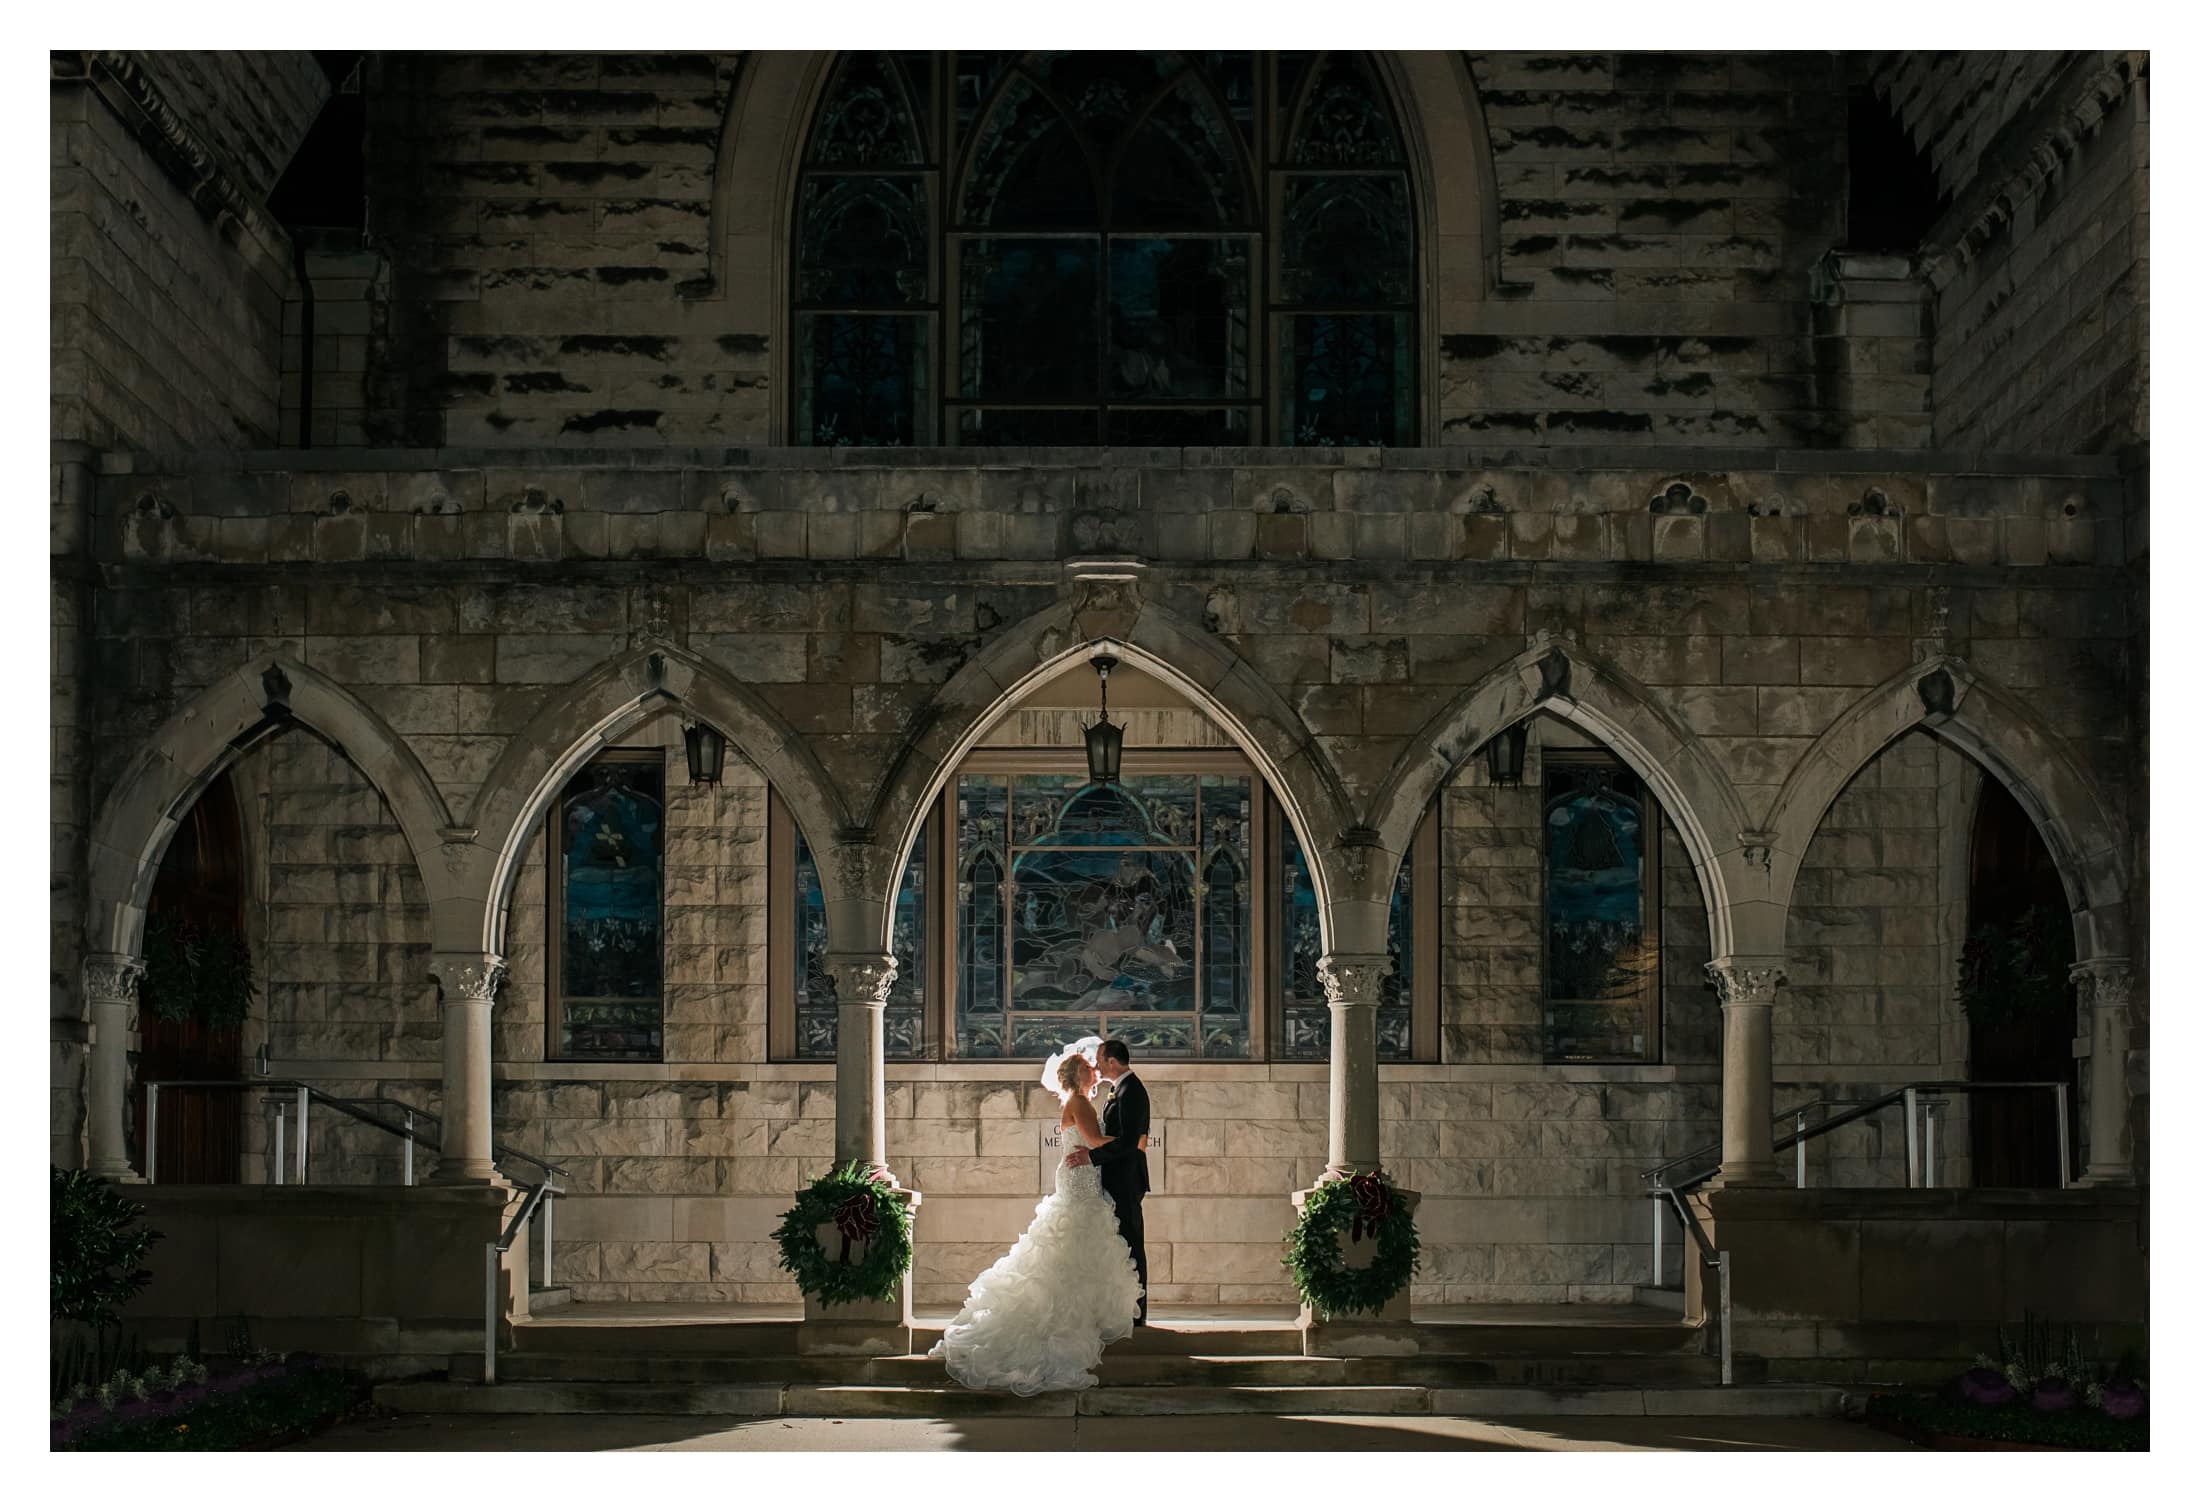 Asheville Destination Wedding, Wedding photography at night, Bride and groom under archway at night, Asheville Downtown Night Wedding Portraits